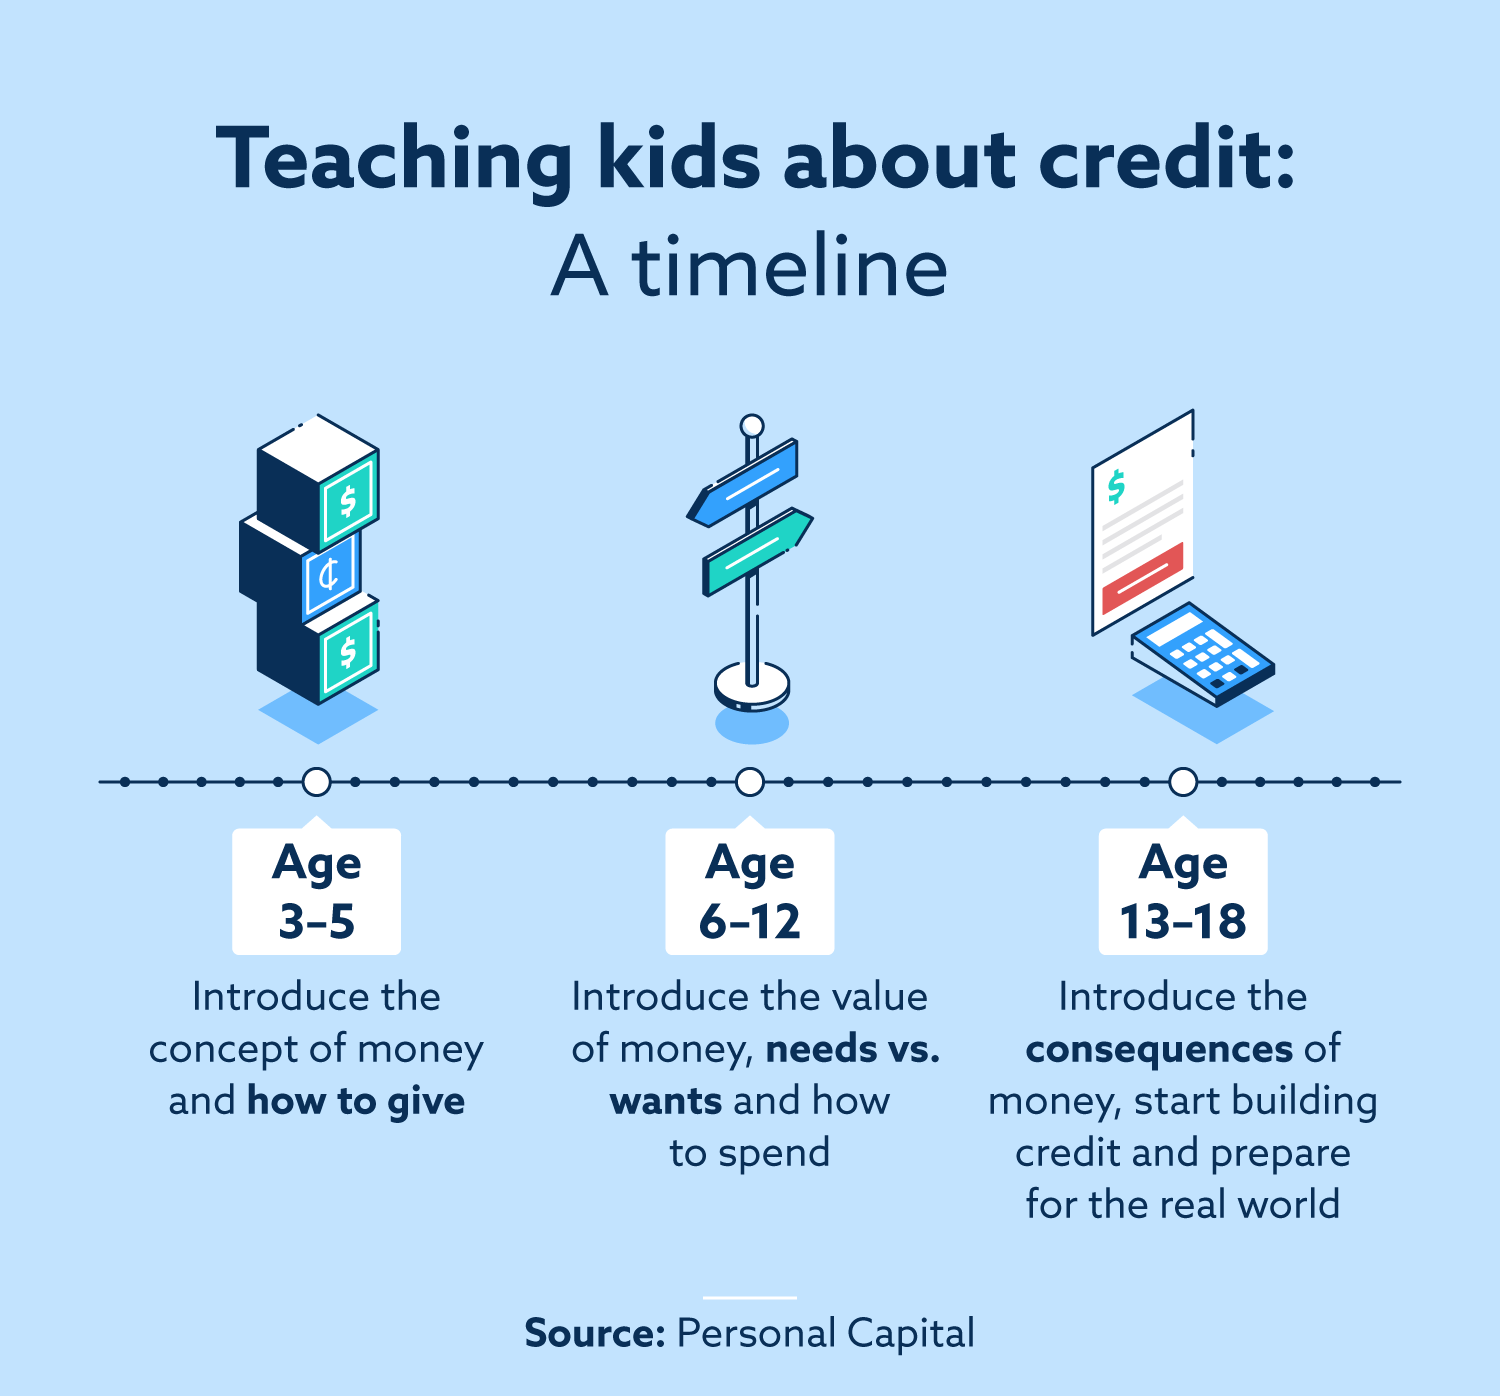 A timeline for teaching kids about credit.